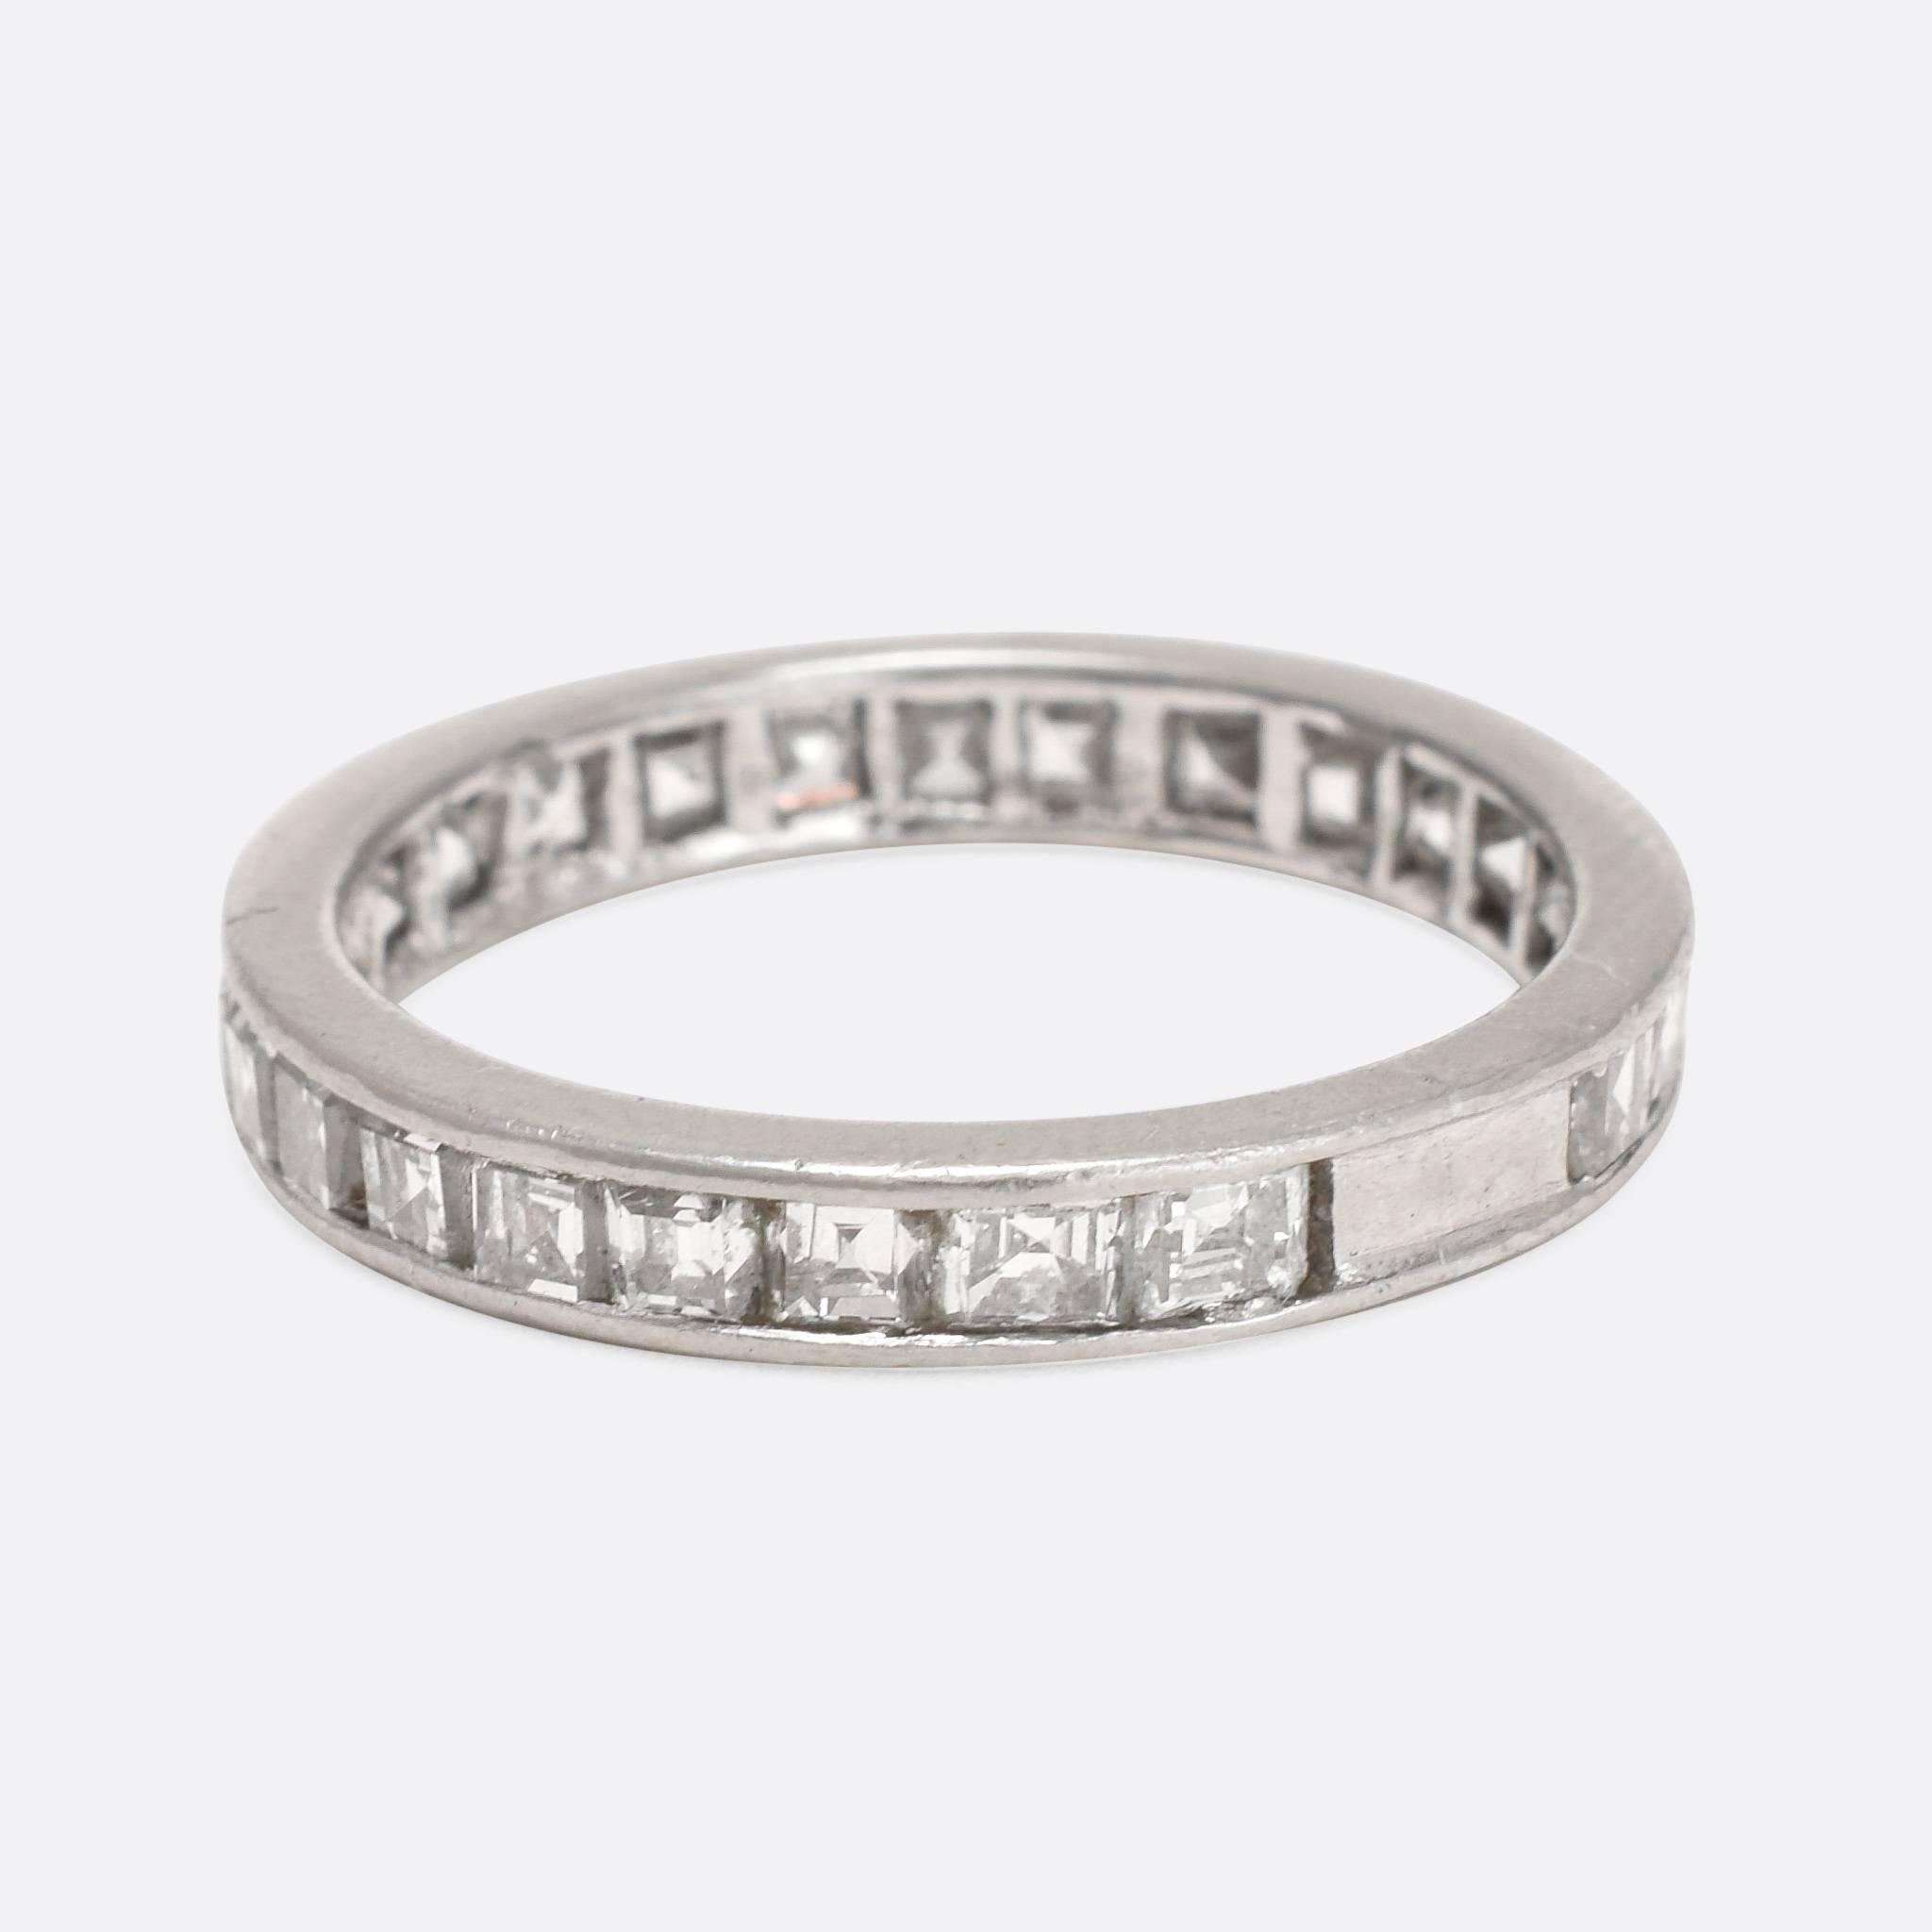 This exceptional vintage eternity ring is fully set with 25 carre cut diamonds, the weight totalling 2 carats. The ring is modelled in platinum throughout, and the deep stones are particularly clean and bright. An refined and timeless ring, unusual